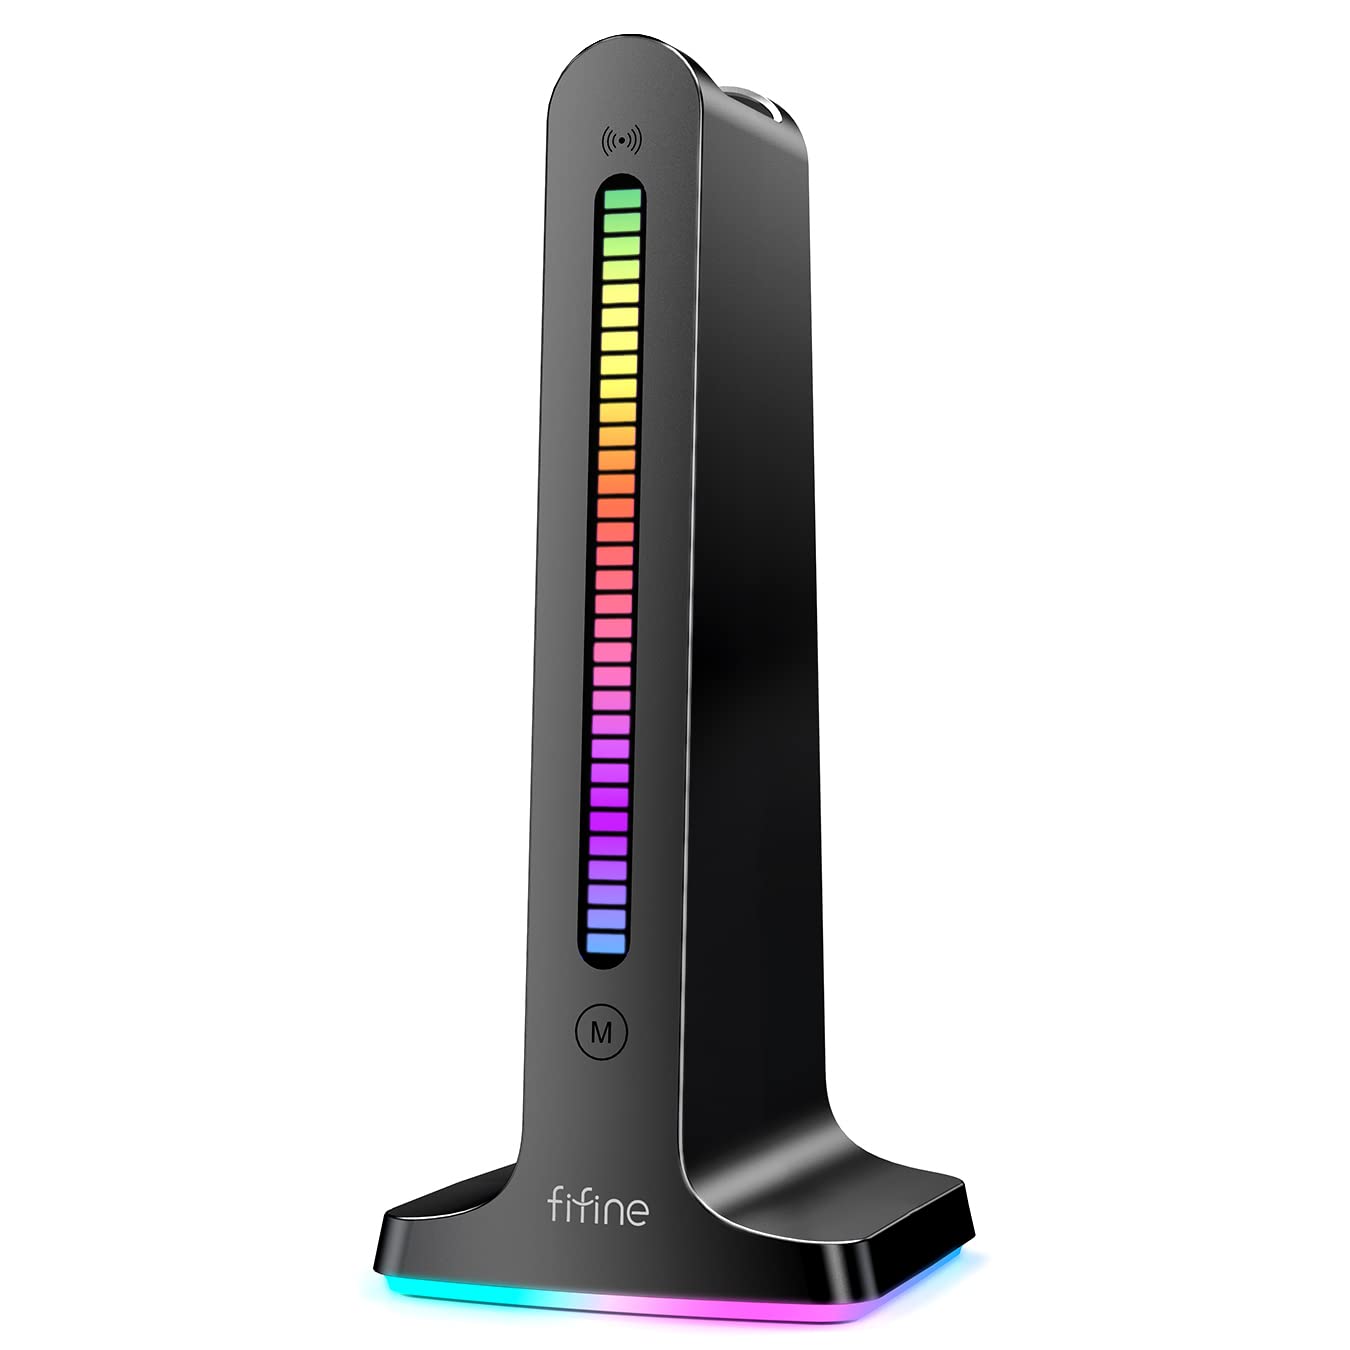 FIFINE S3 Gaming Headset Stand-RGB Headphones Stand Holder PC Computer Desktop Accessories with 2 USB Ports for Gamer, with Solid Base, Sound Light Sync, Light Control Keys (S-3)